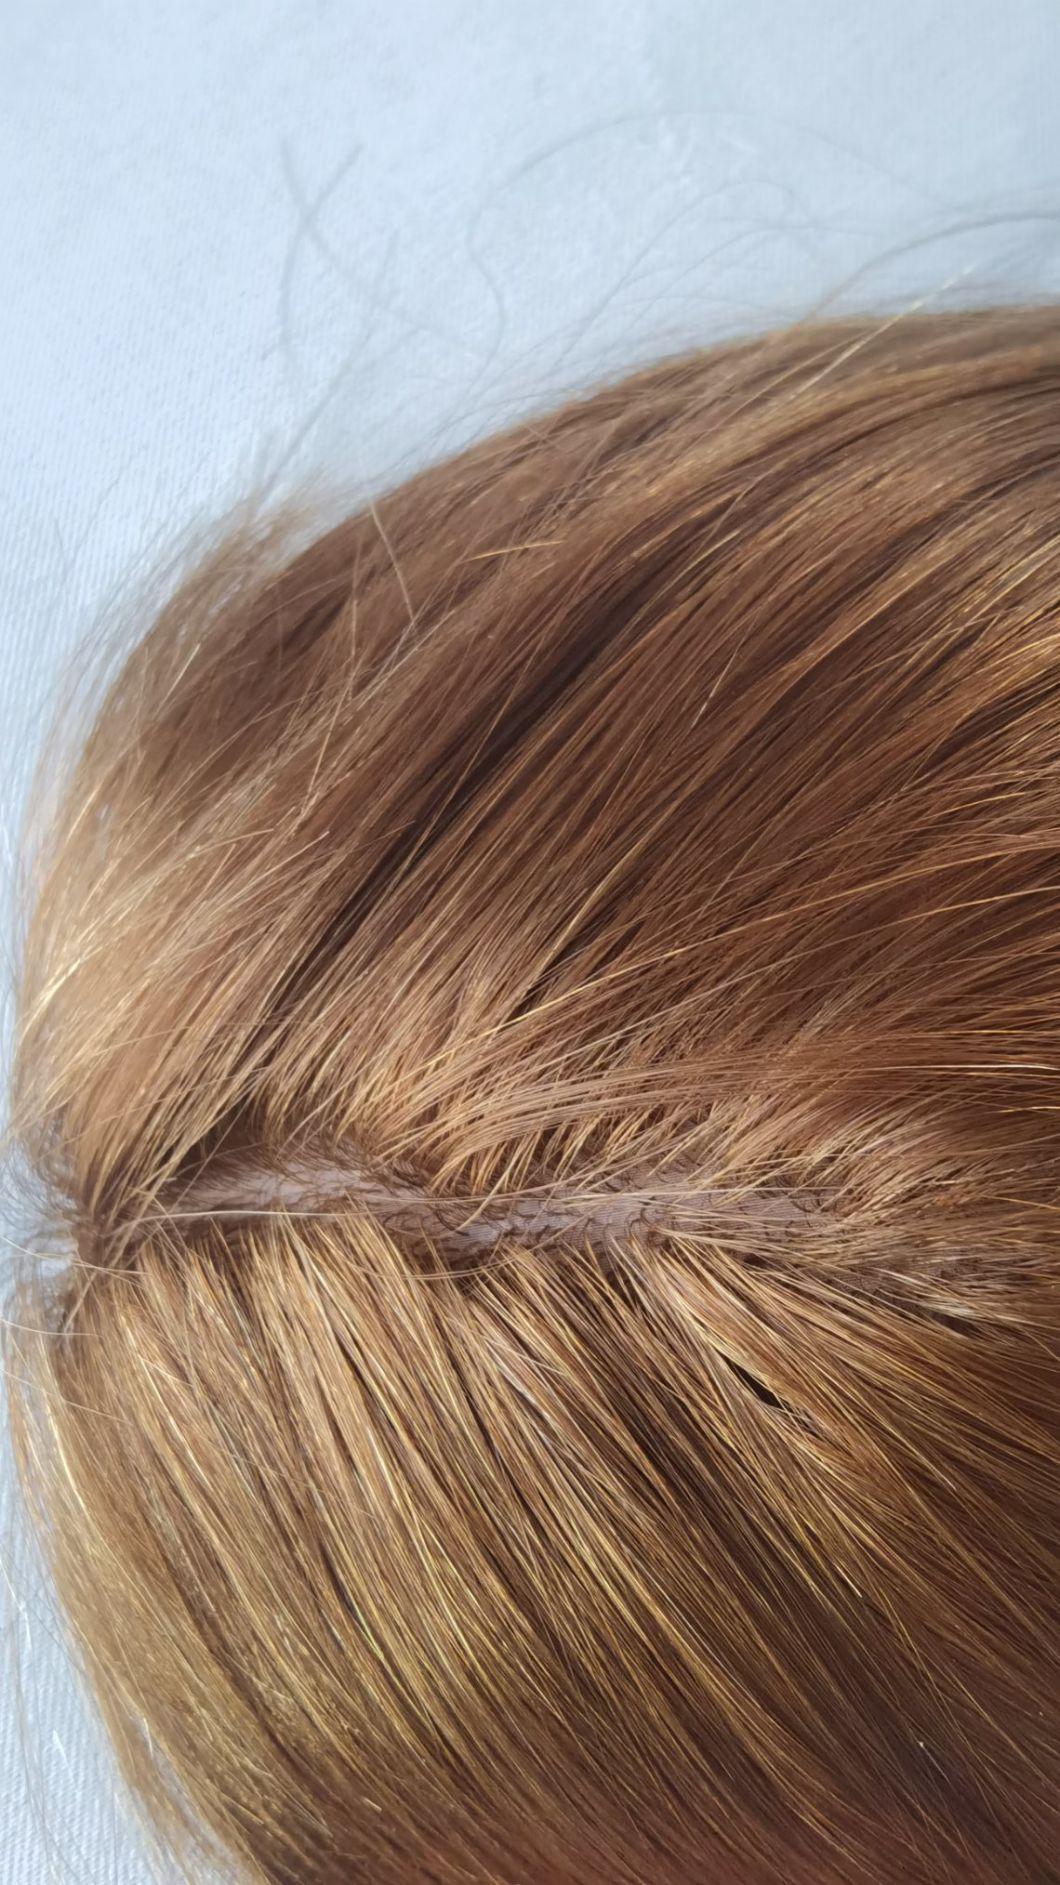 2022 Most Natural Silk Top Injected Lace Human Hair Wigs Made of Remy Human Hair